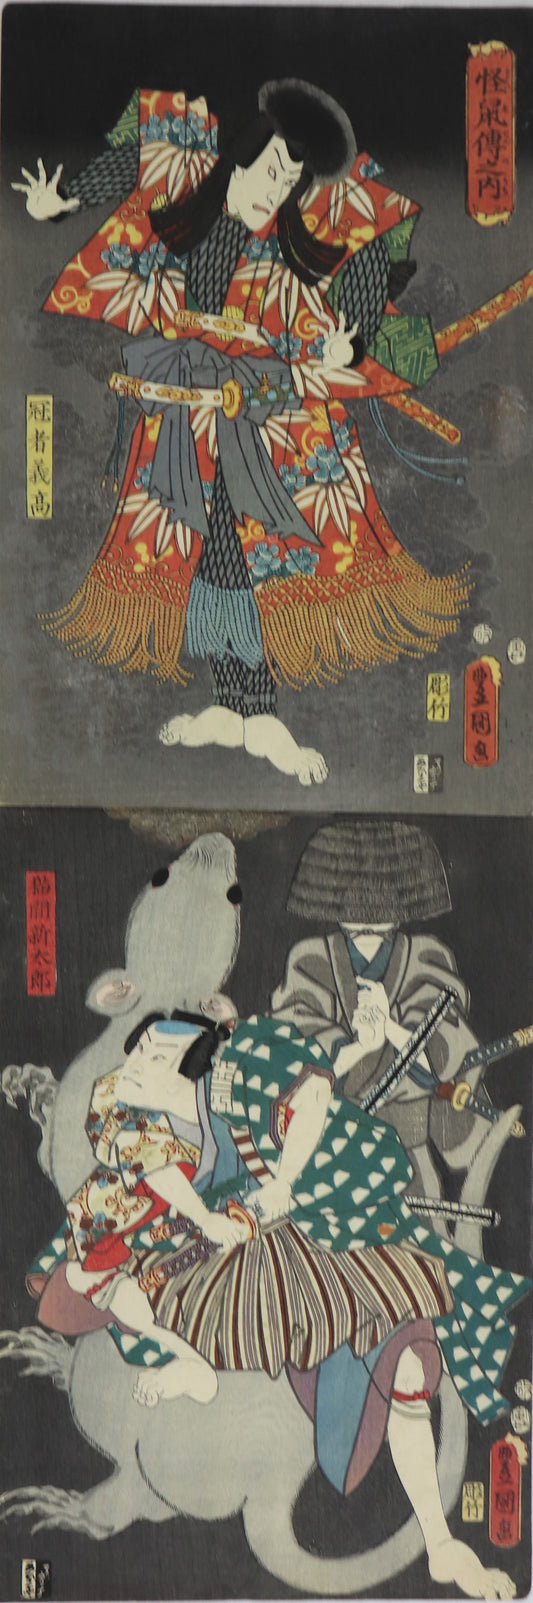 Story of Monstruous Rats  by Toyokuni III / Histoire de Rats Monstrueux par Toyokuni III ( 1854)